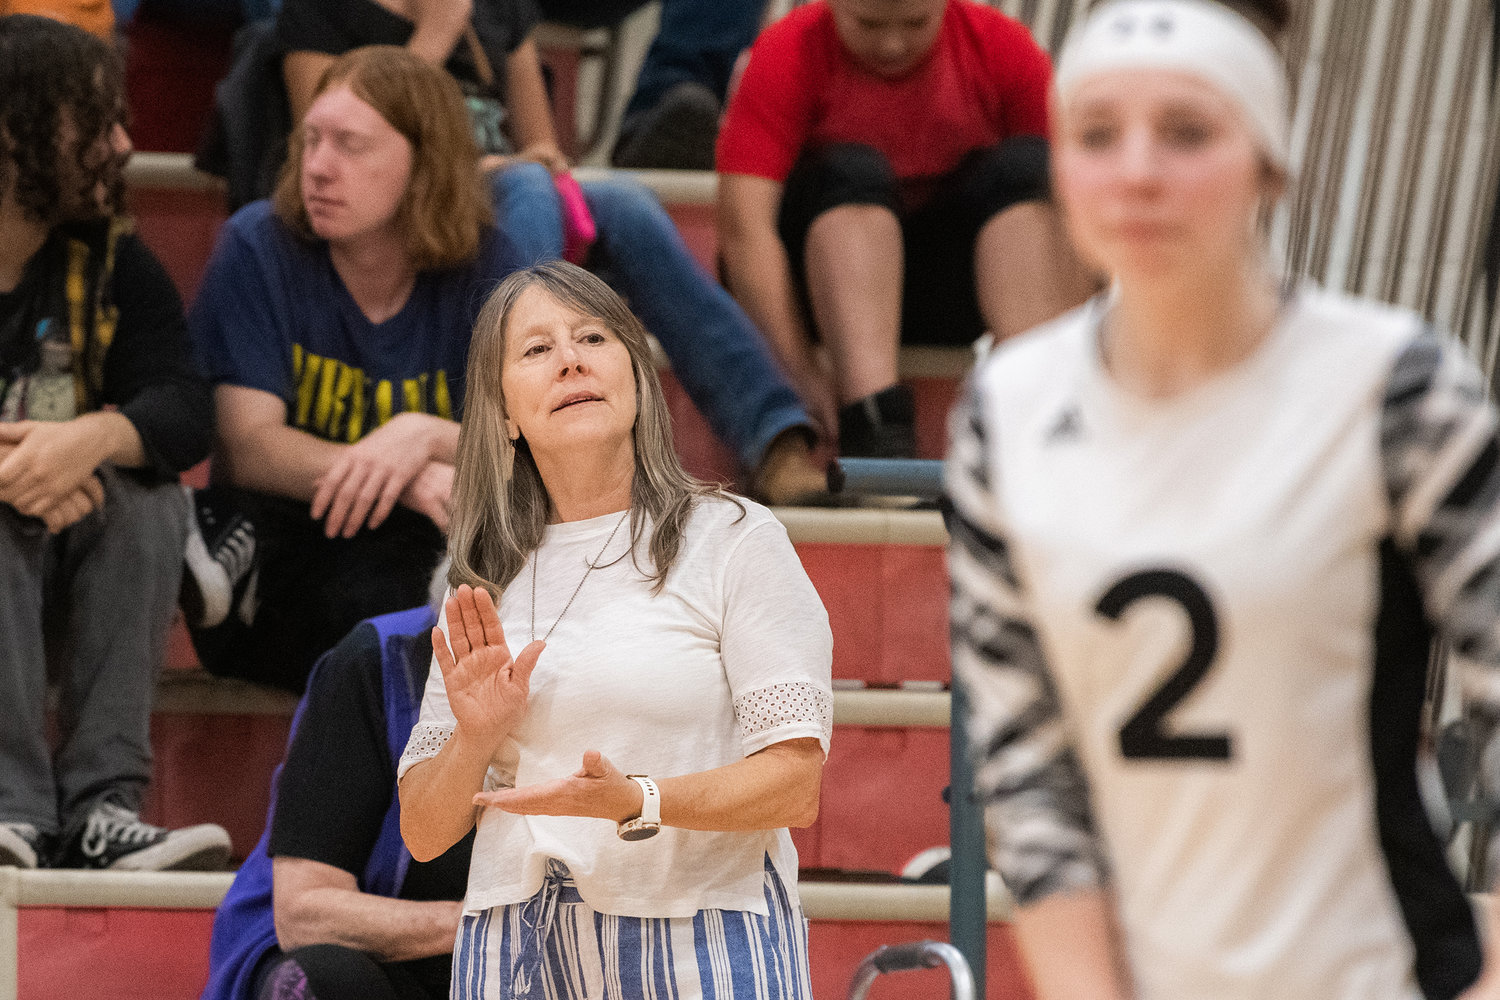 Toledo Head Coach Kelli Larson claps for players on the court during a game against Rainier on Tuesday.